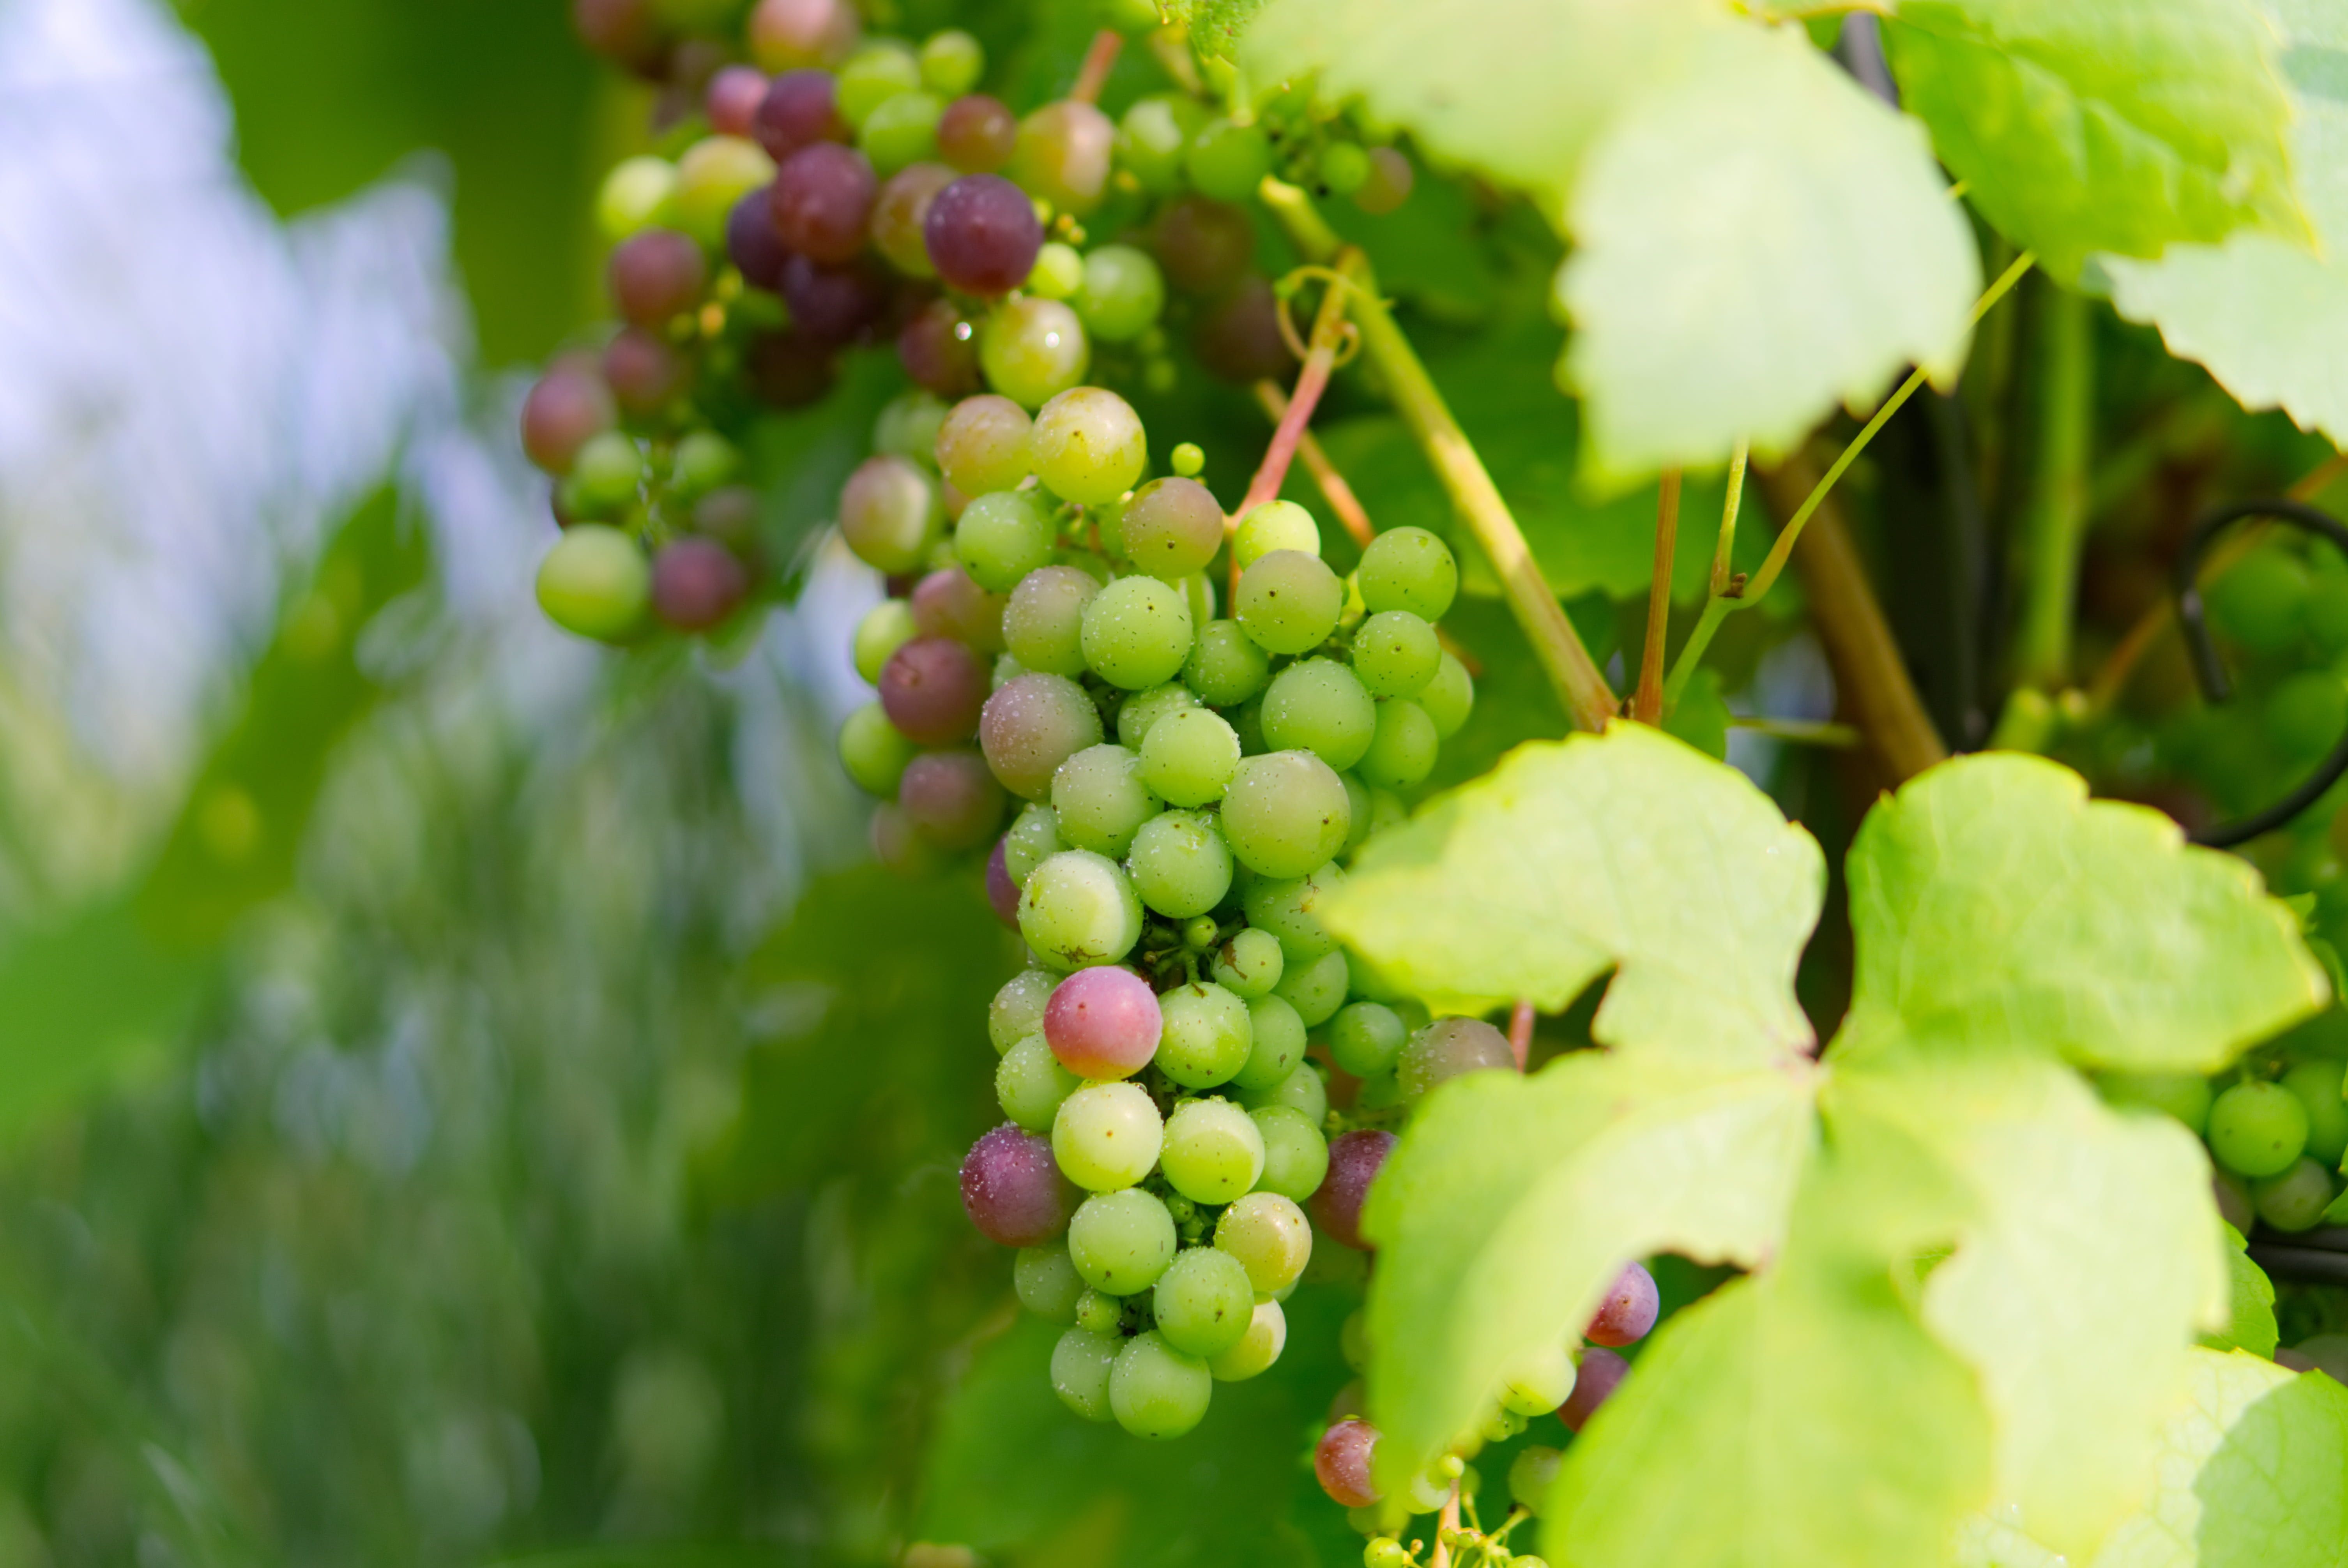 white grapes #grapes green grapes #green #healthy #fruit #winegrowing #vine #grapevine #nature #eat #fruits #leaves #wine vi. Green grapes, Growing grapes, Grapes